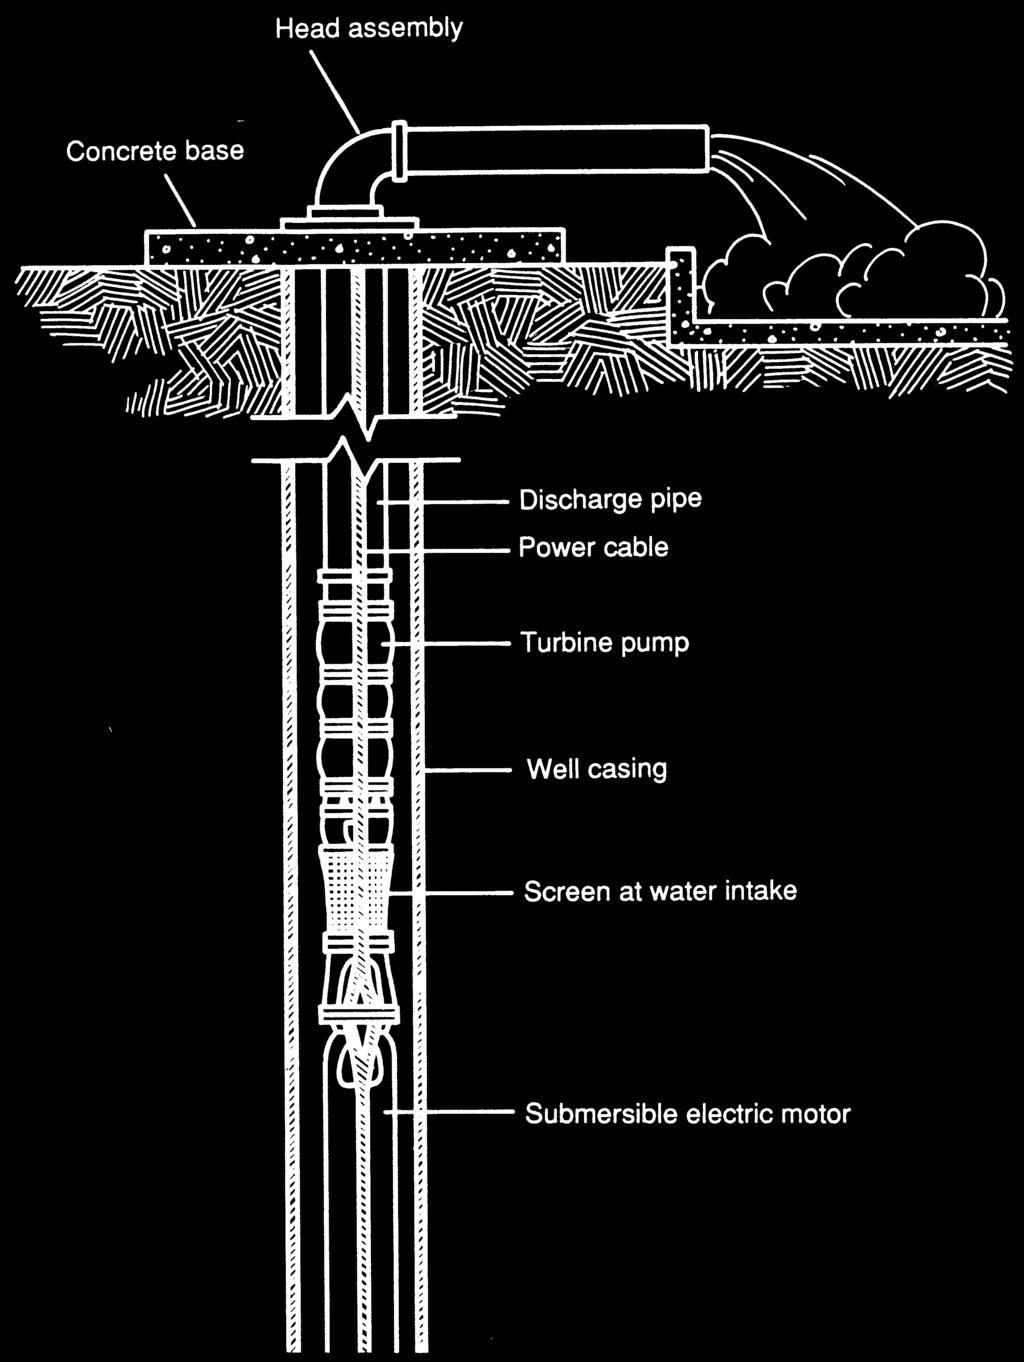 Because the pump is in the well, lightning protection should be wired into the control box. Lightning striking on wells with submersible pumps is a leading cause of pump failures.